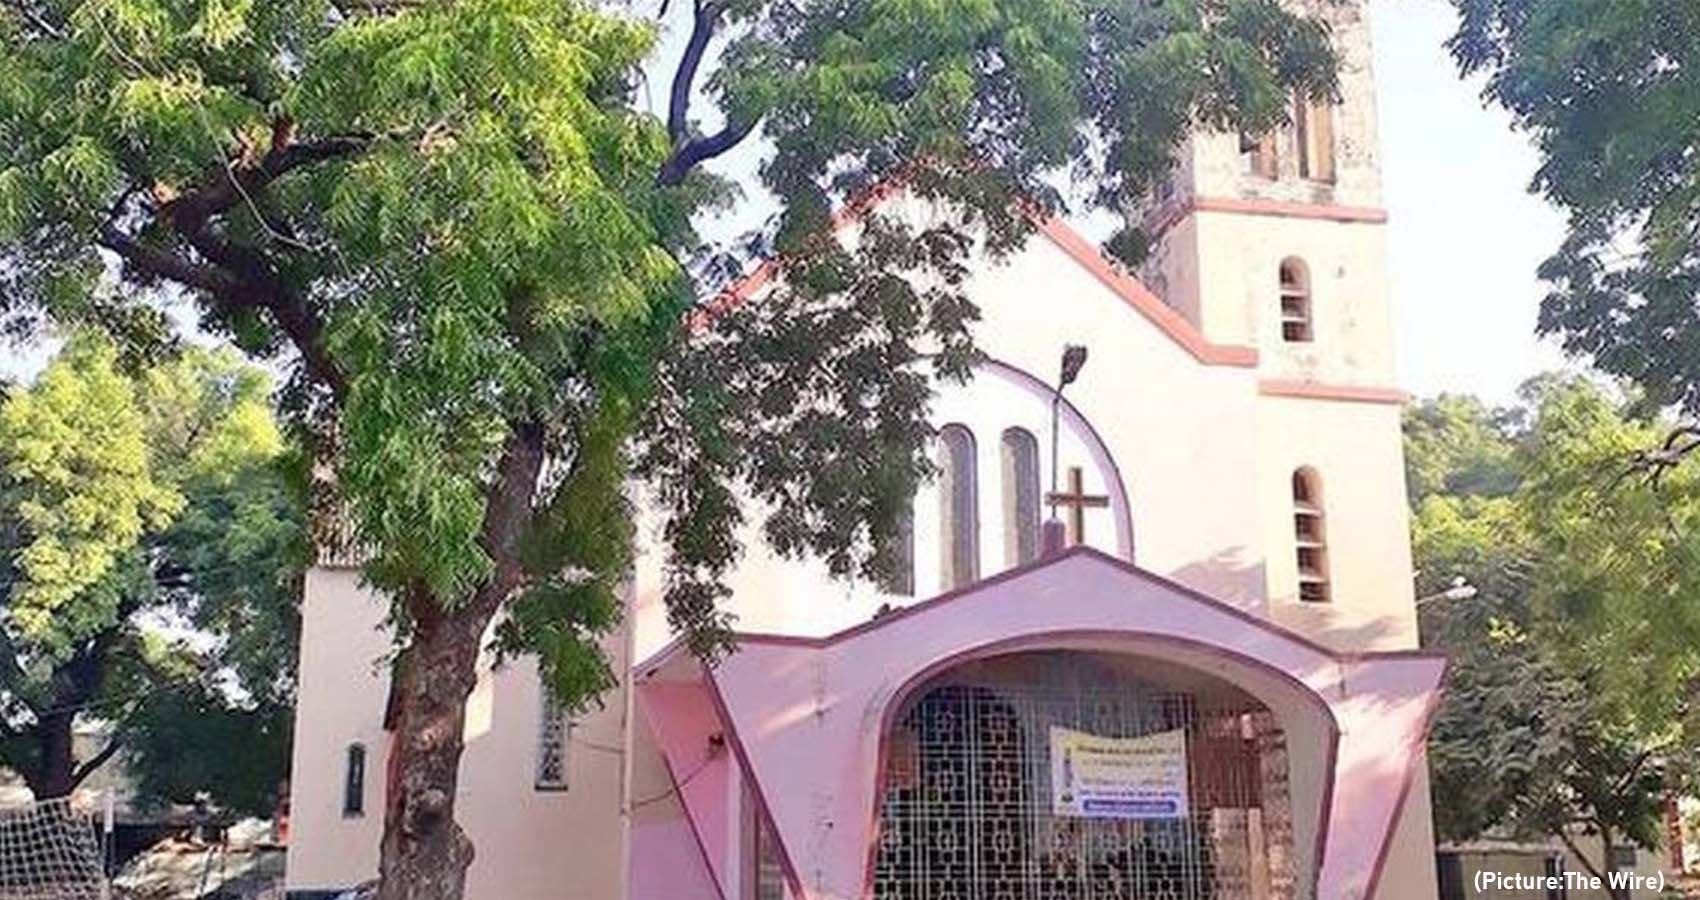 Hindu Group In India Threatens To Demolish Churches In BJP-Ruled Northern State